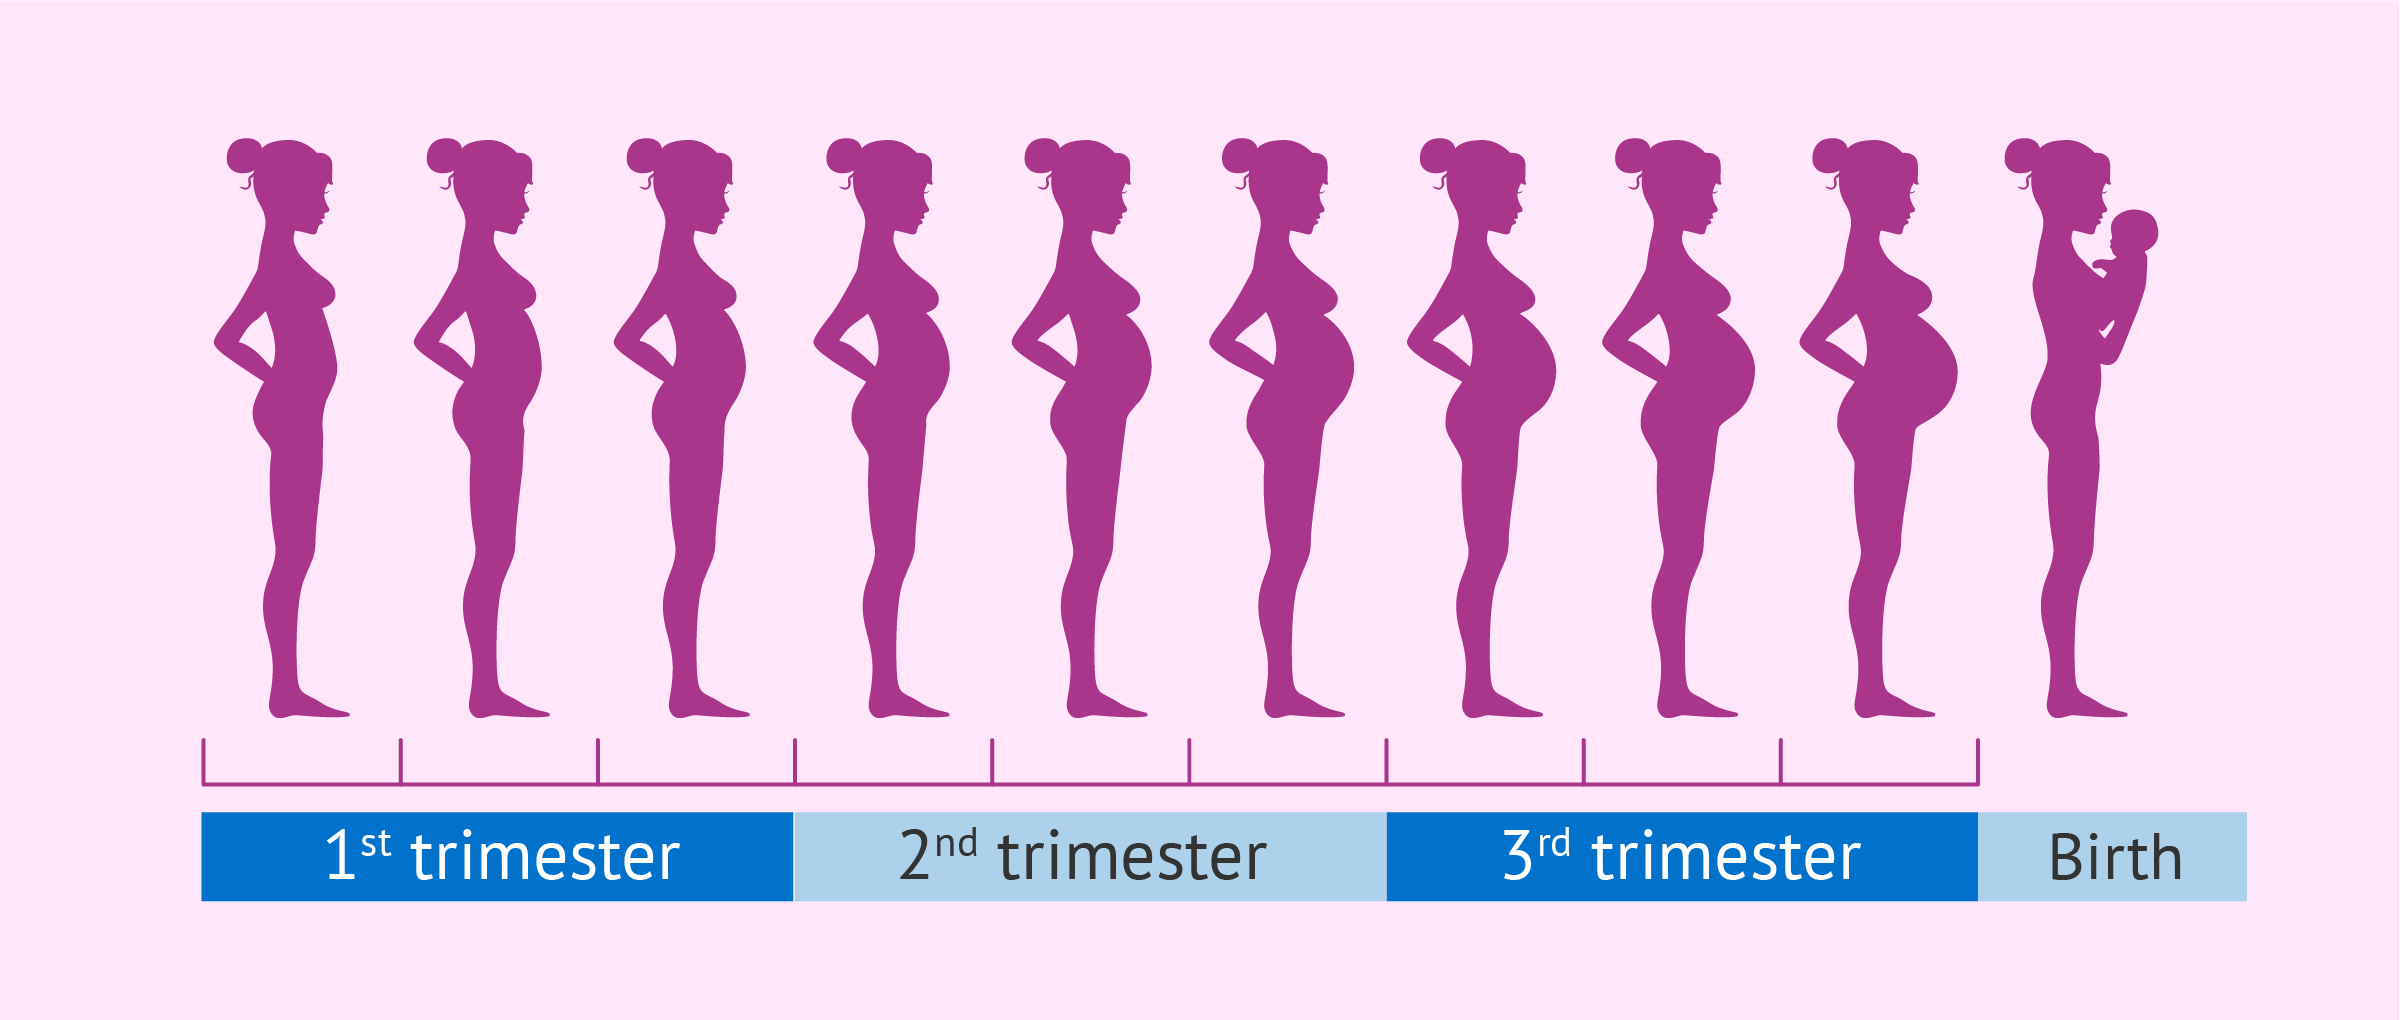 How Fast Does A Pregnant Woman S Belly Grow